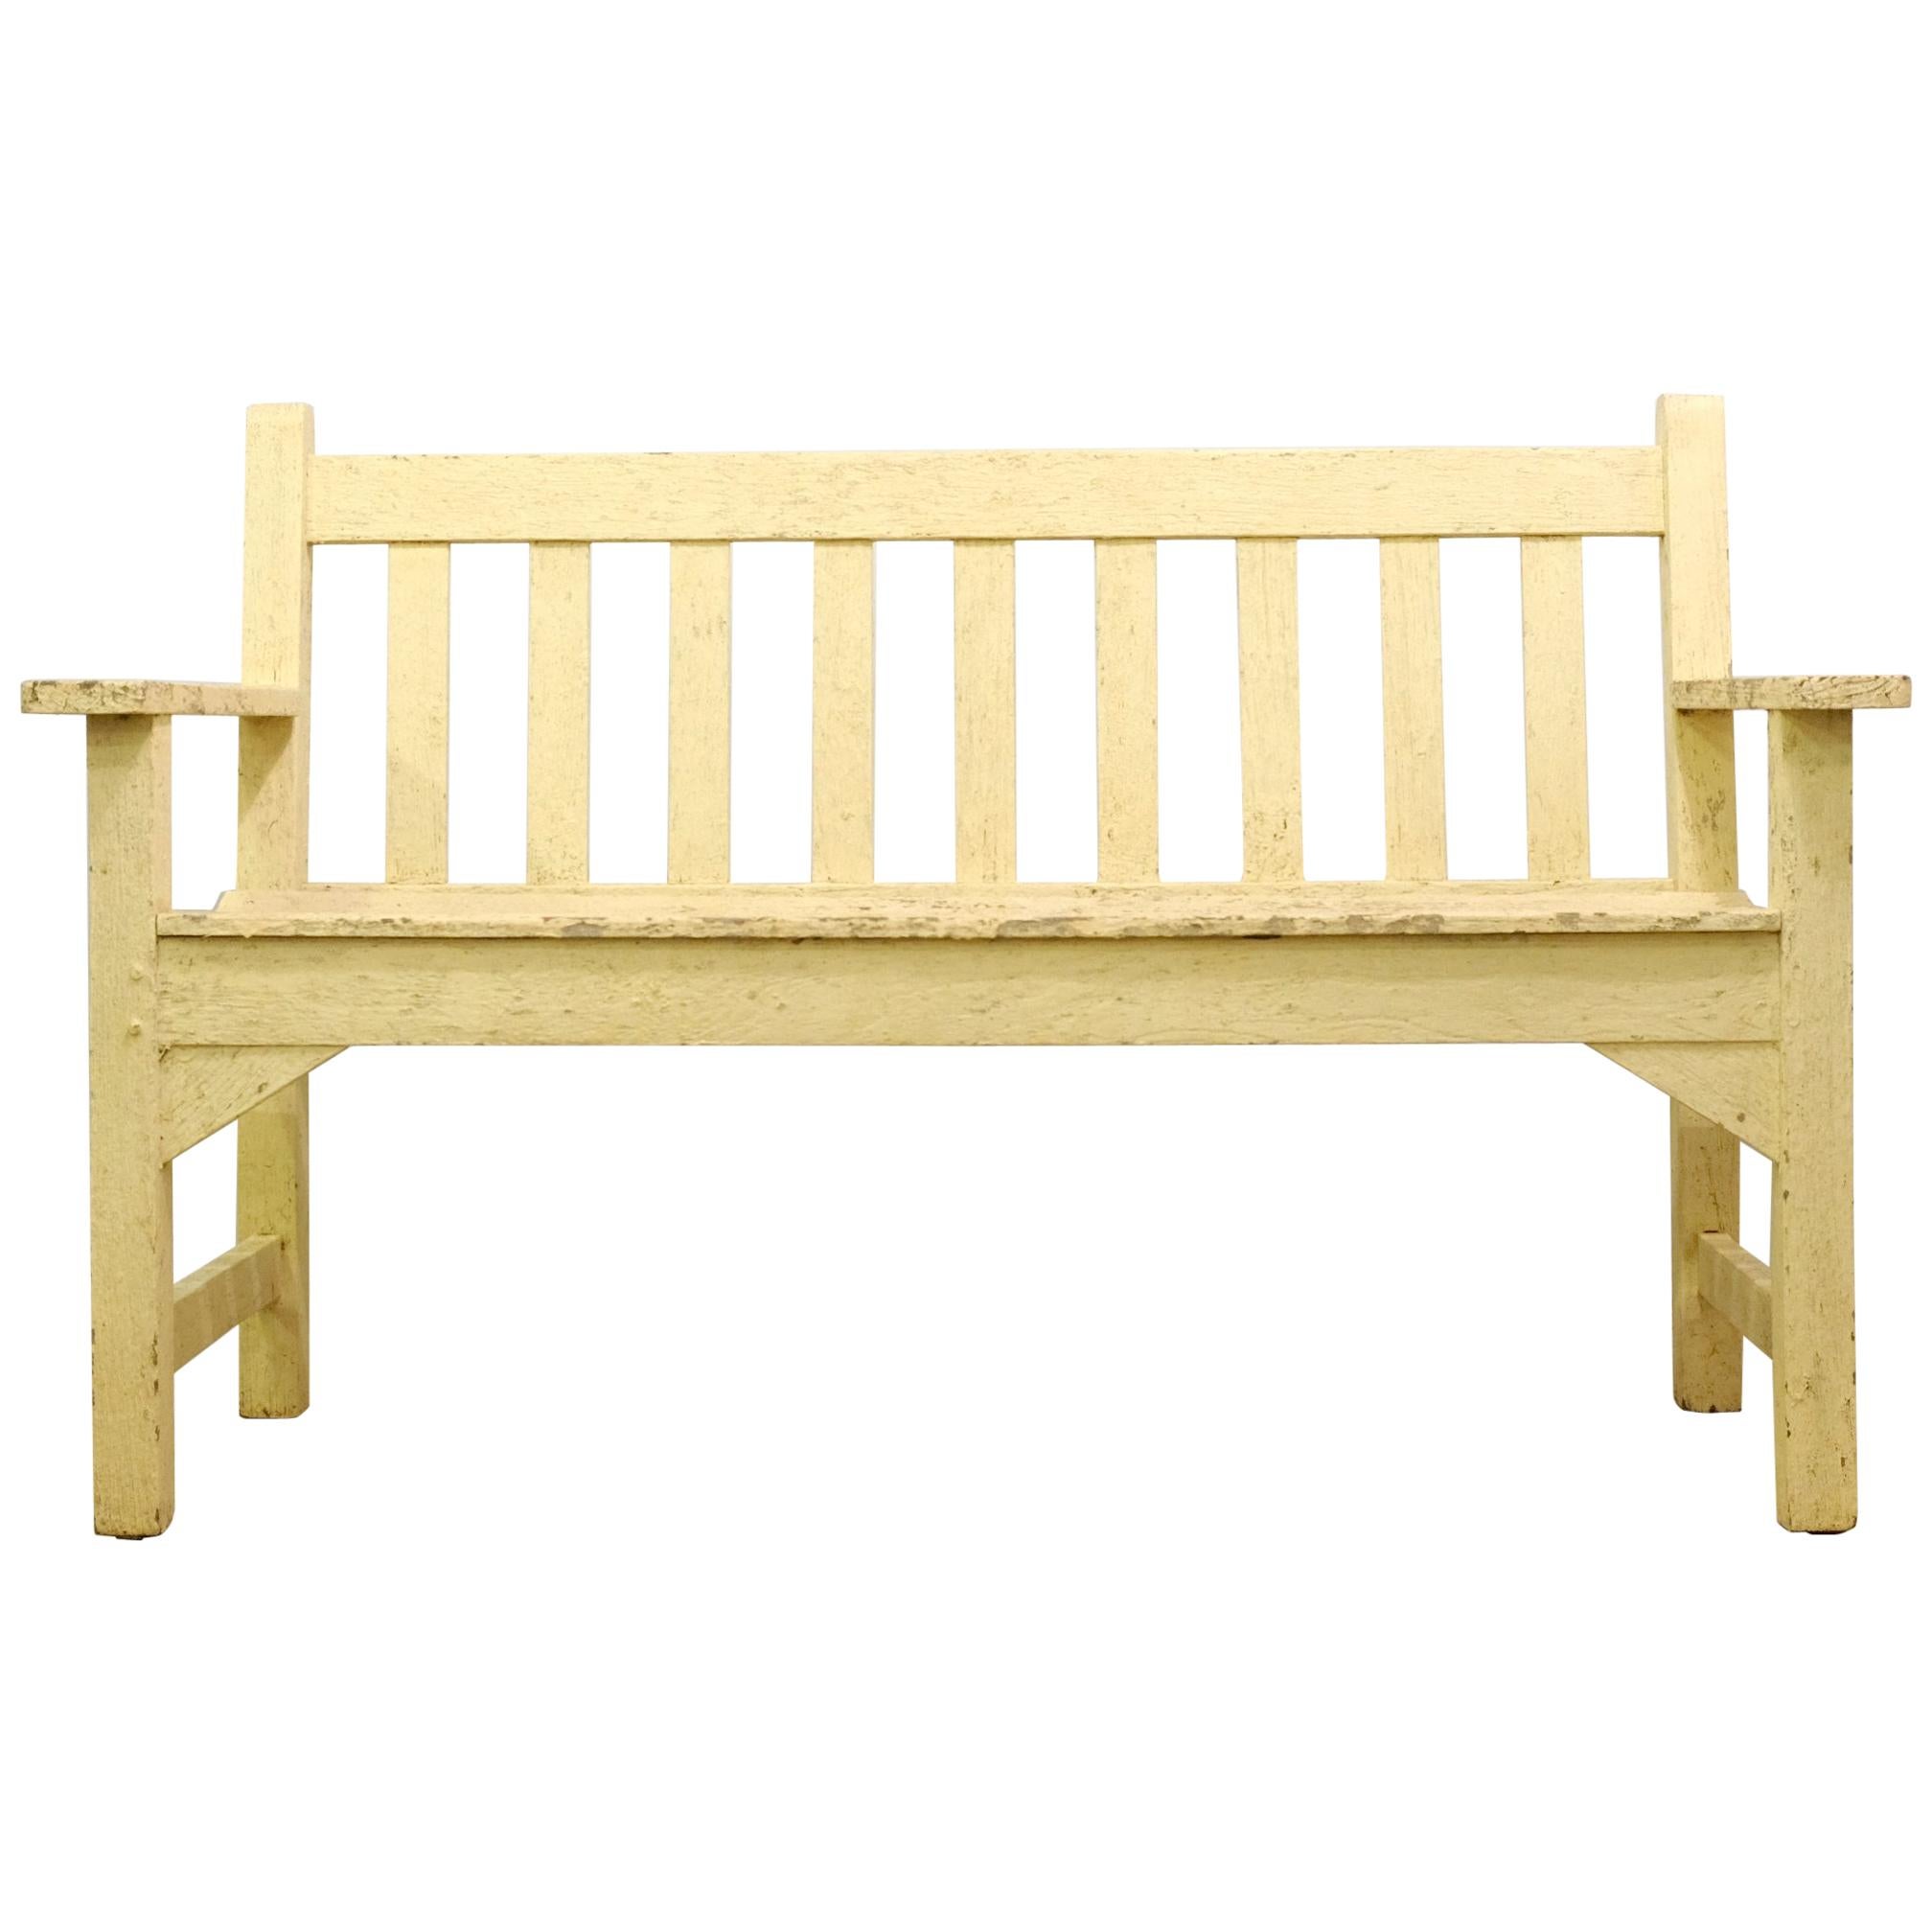 Teak Garden Bench with a Well Weathered Yellow Painted Finish, Mid-20th Century